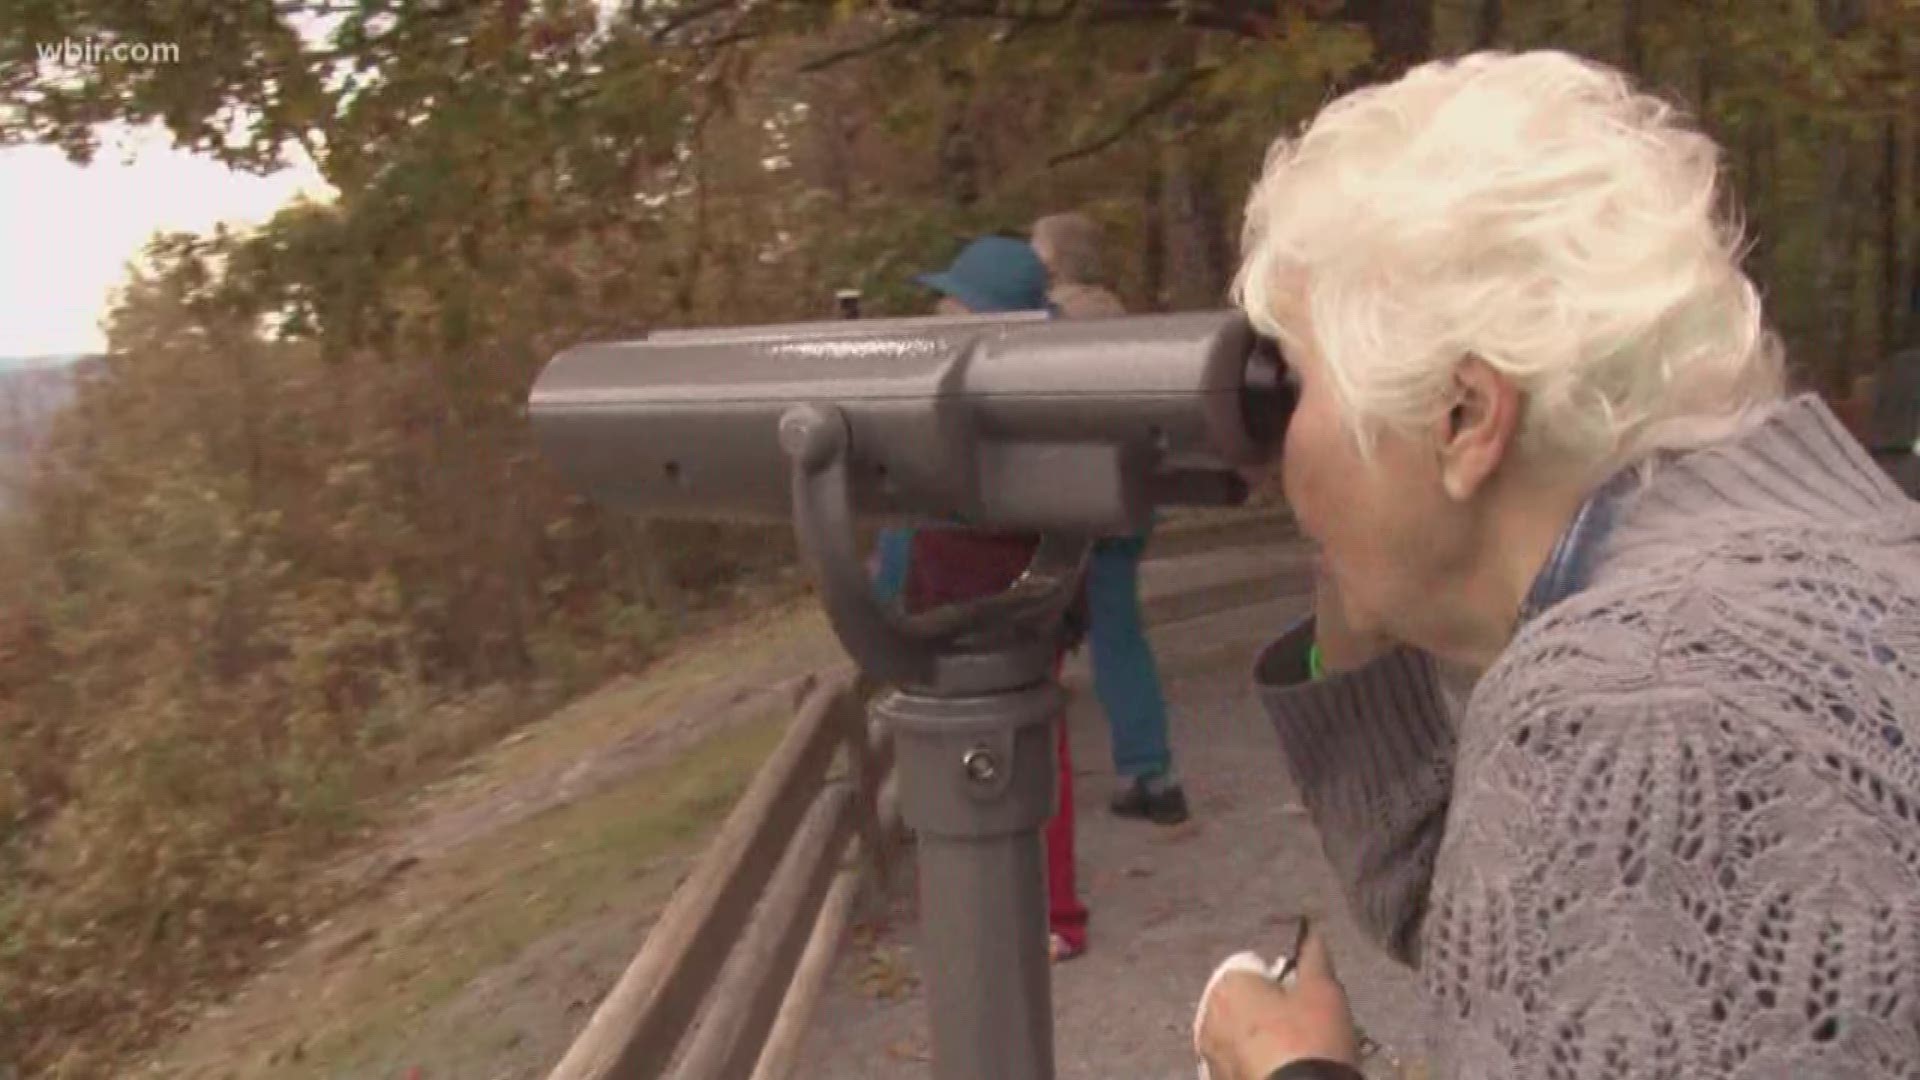 Nov. 1, 2017: Tennessee Tourism is installing color-blindness viewfinders at scenic overlooks in the state to help people who are colorblind enjoy the fall colors.